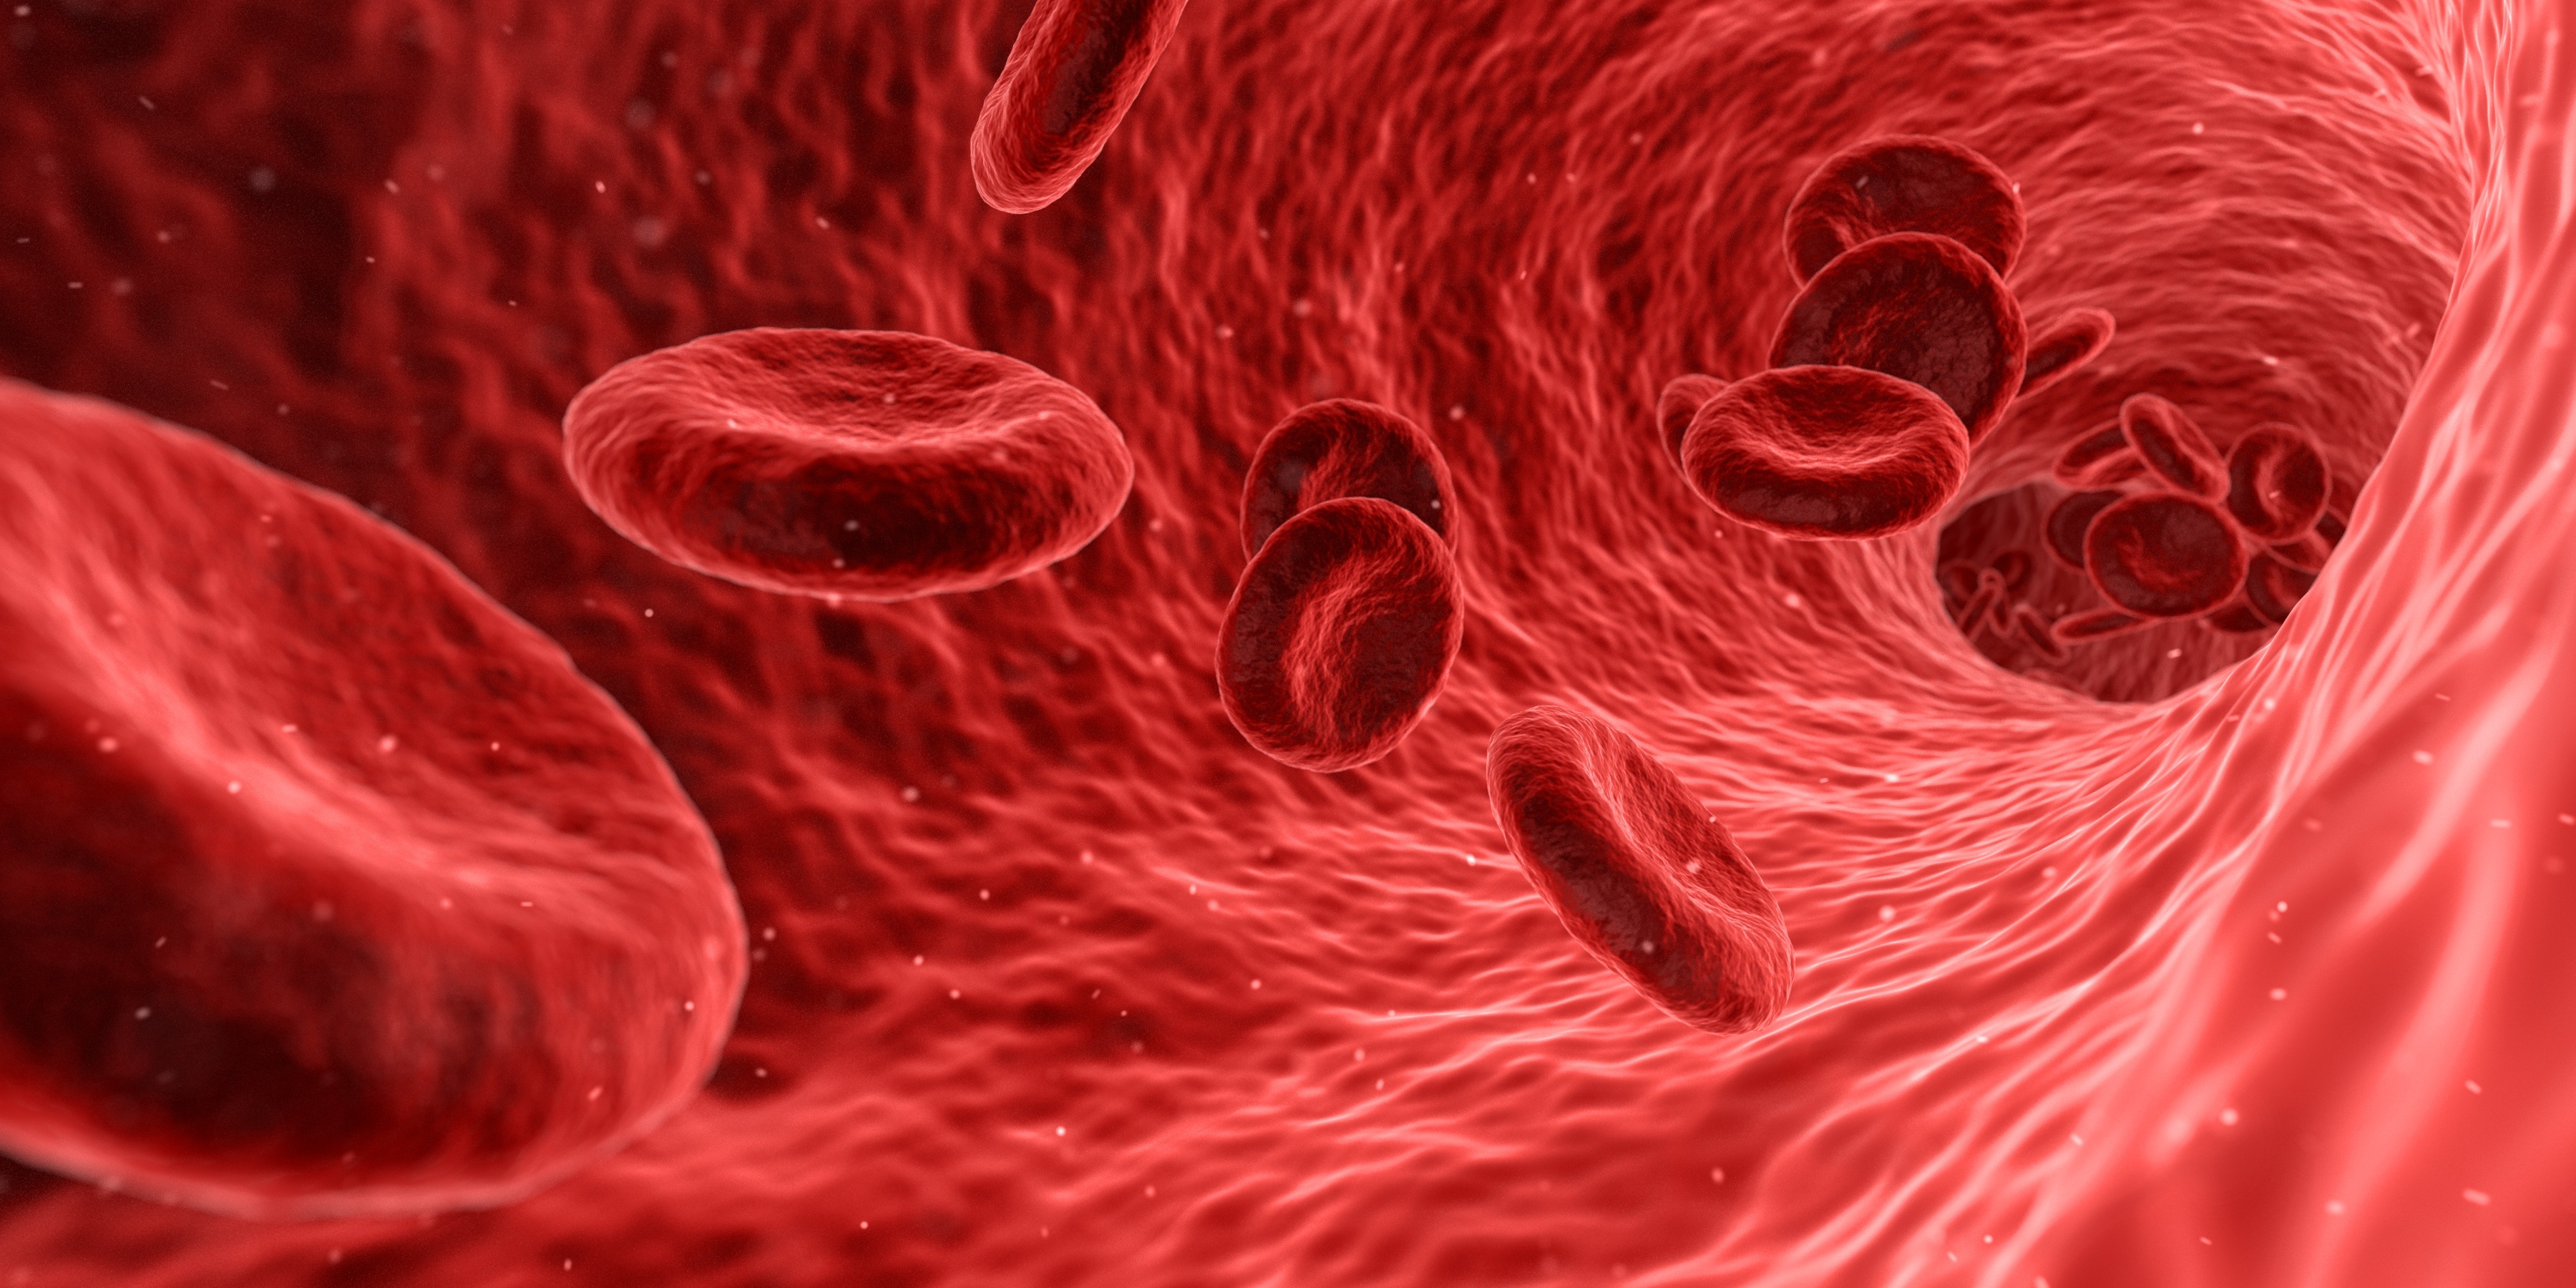 Blood cells red medical drawing free image download